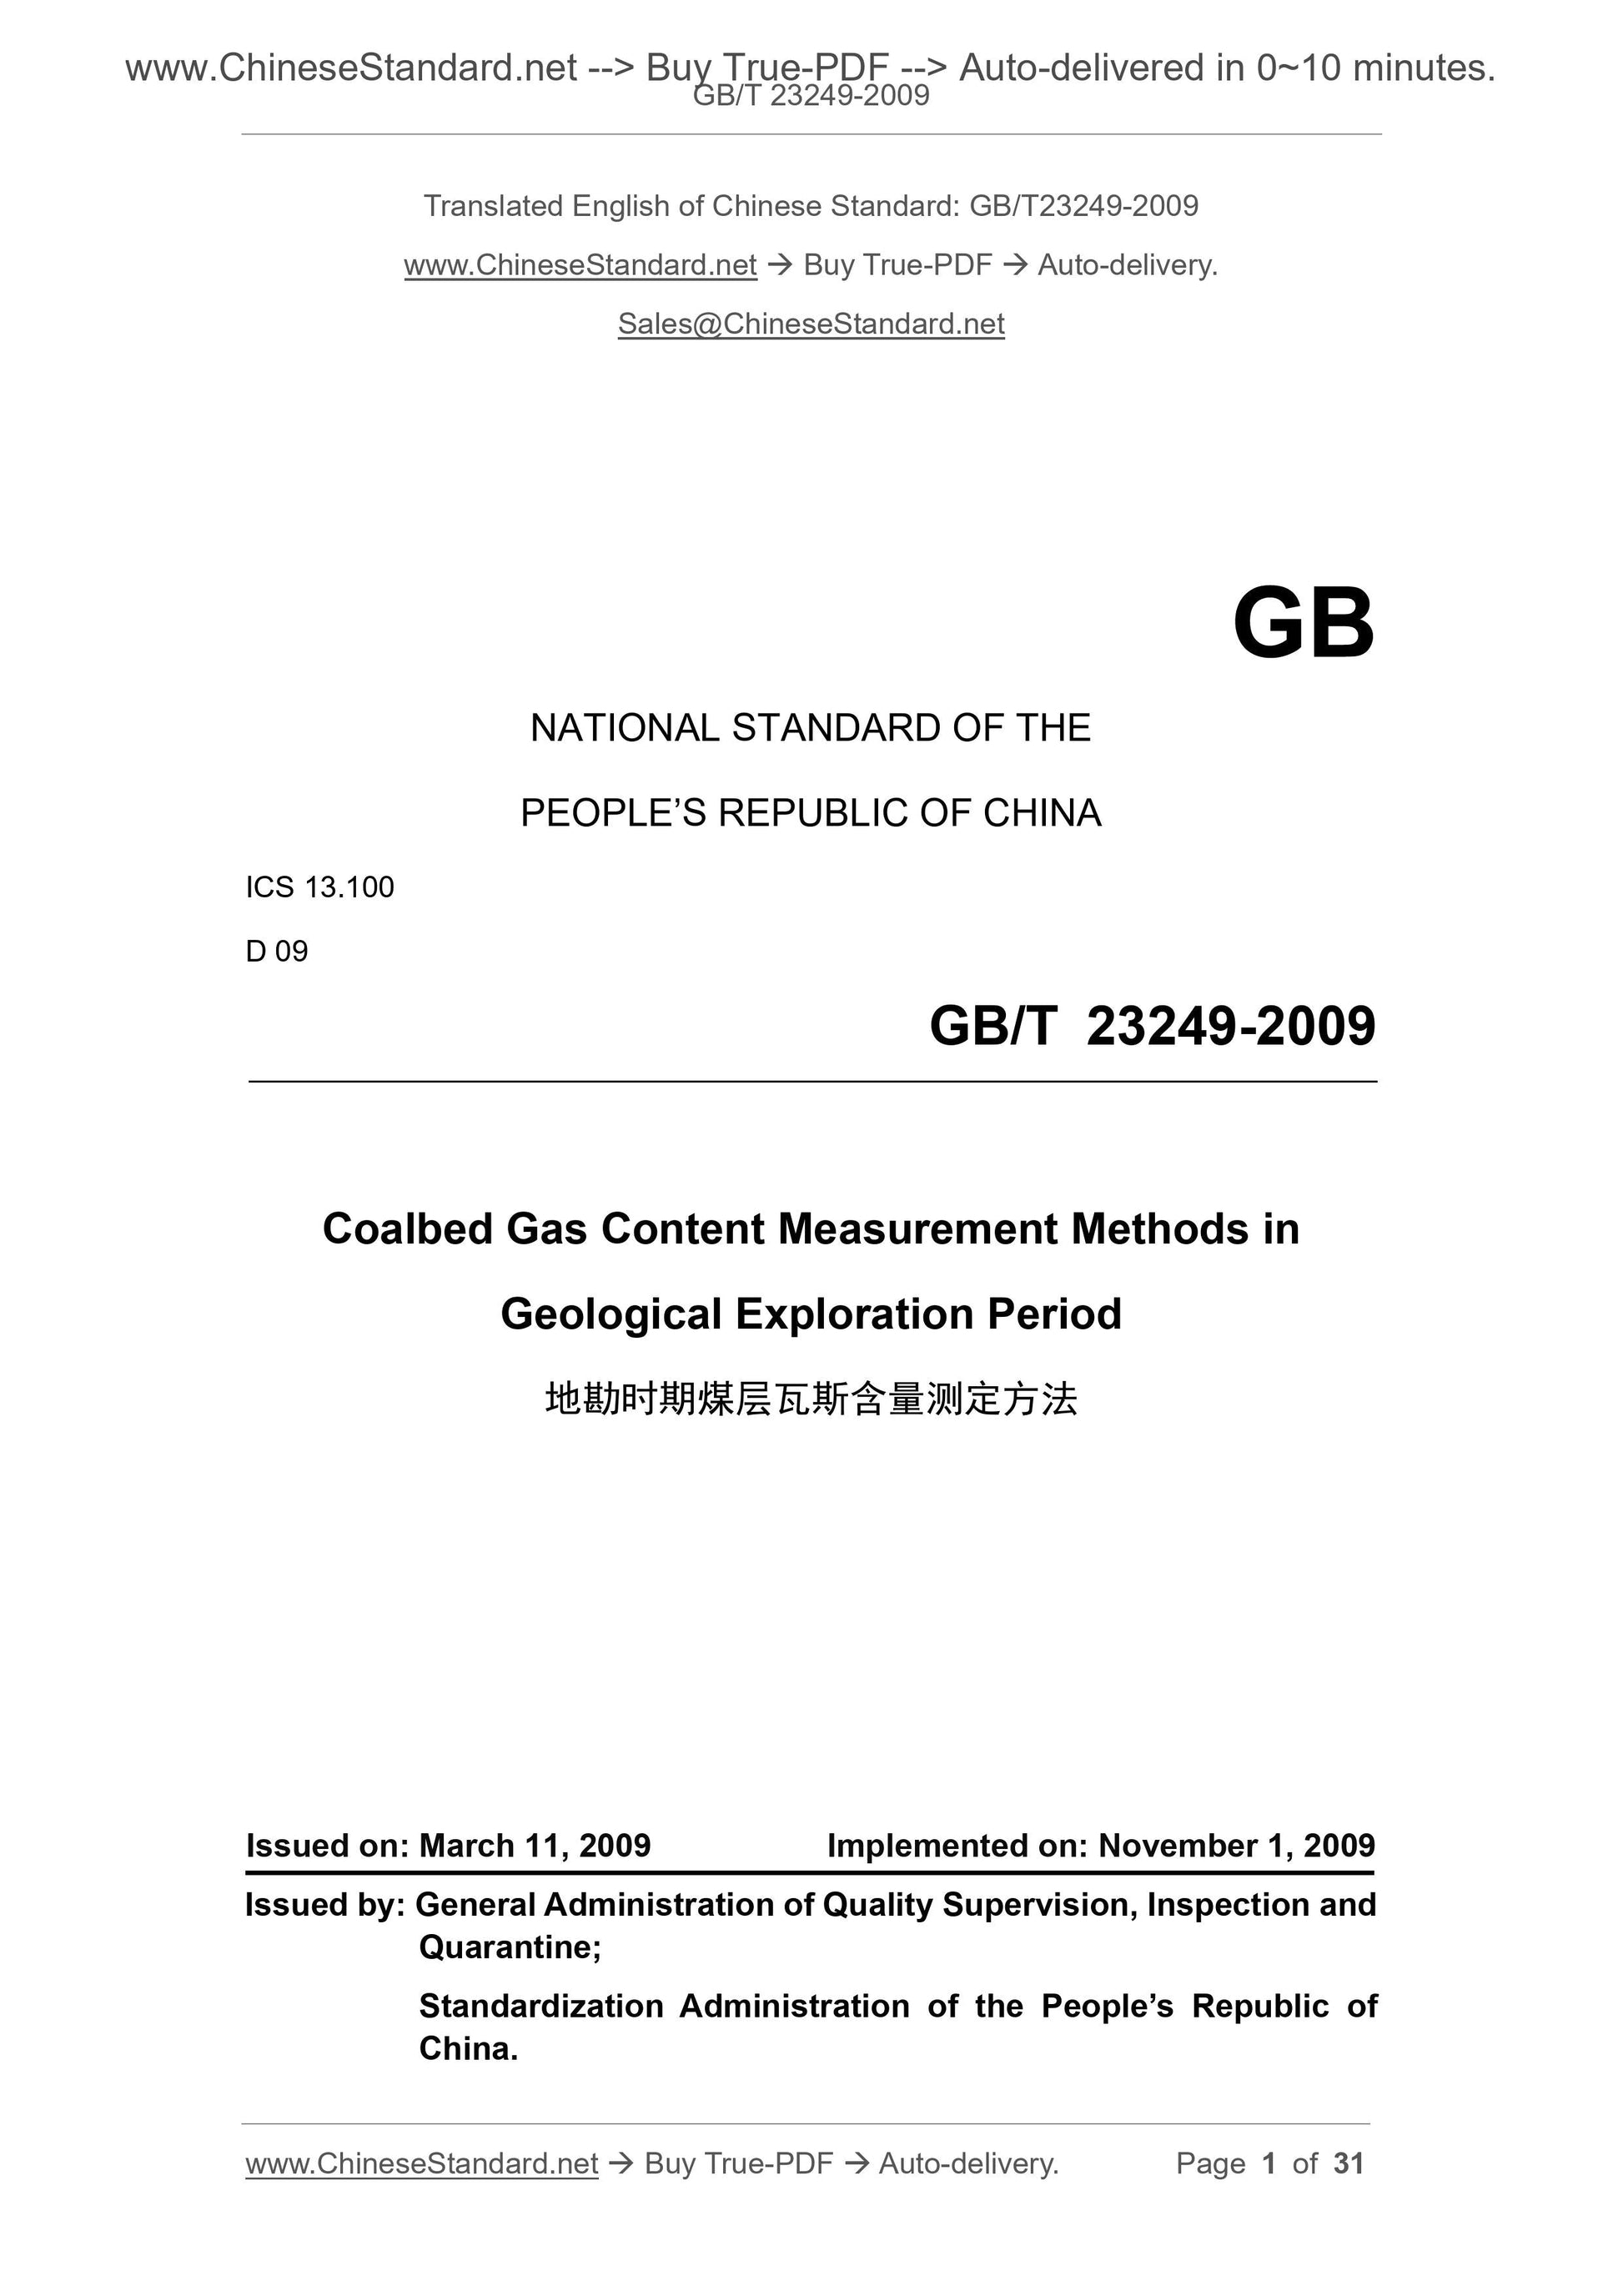 GB/T 23249-2009 Page 1